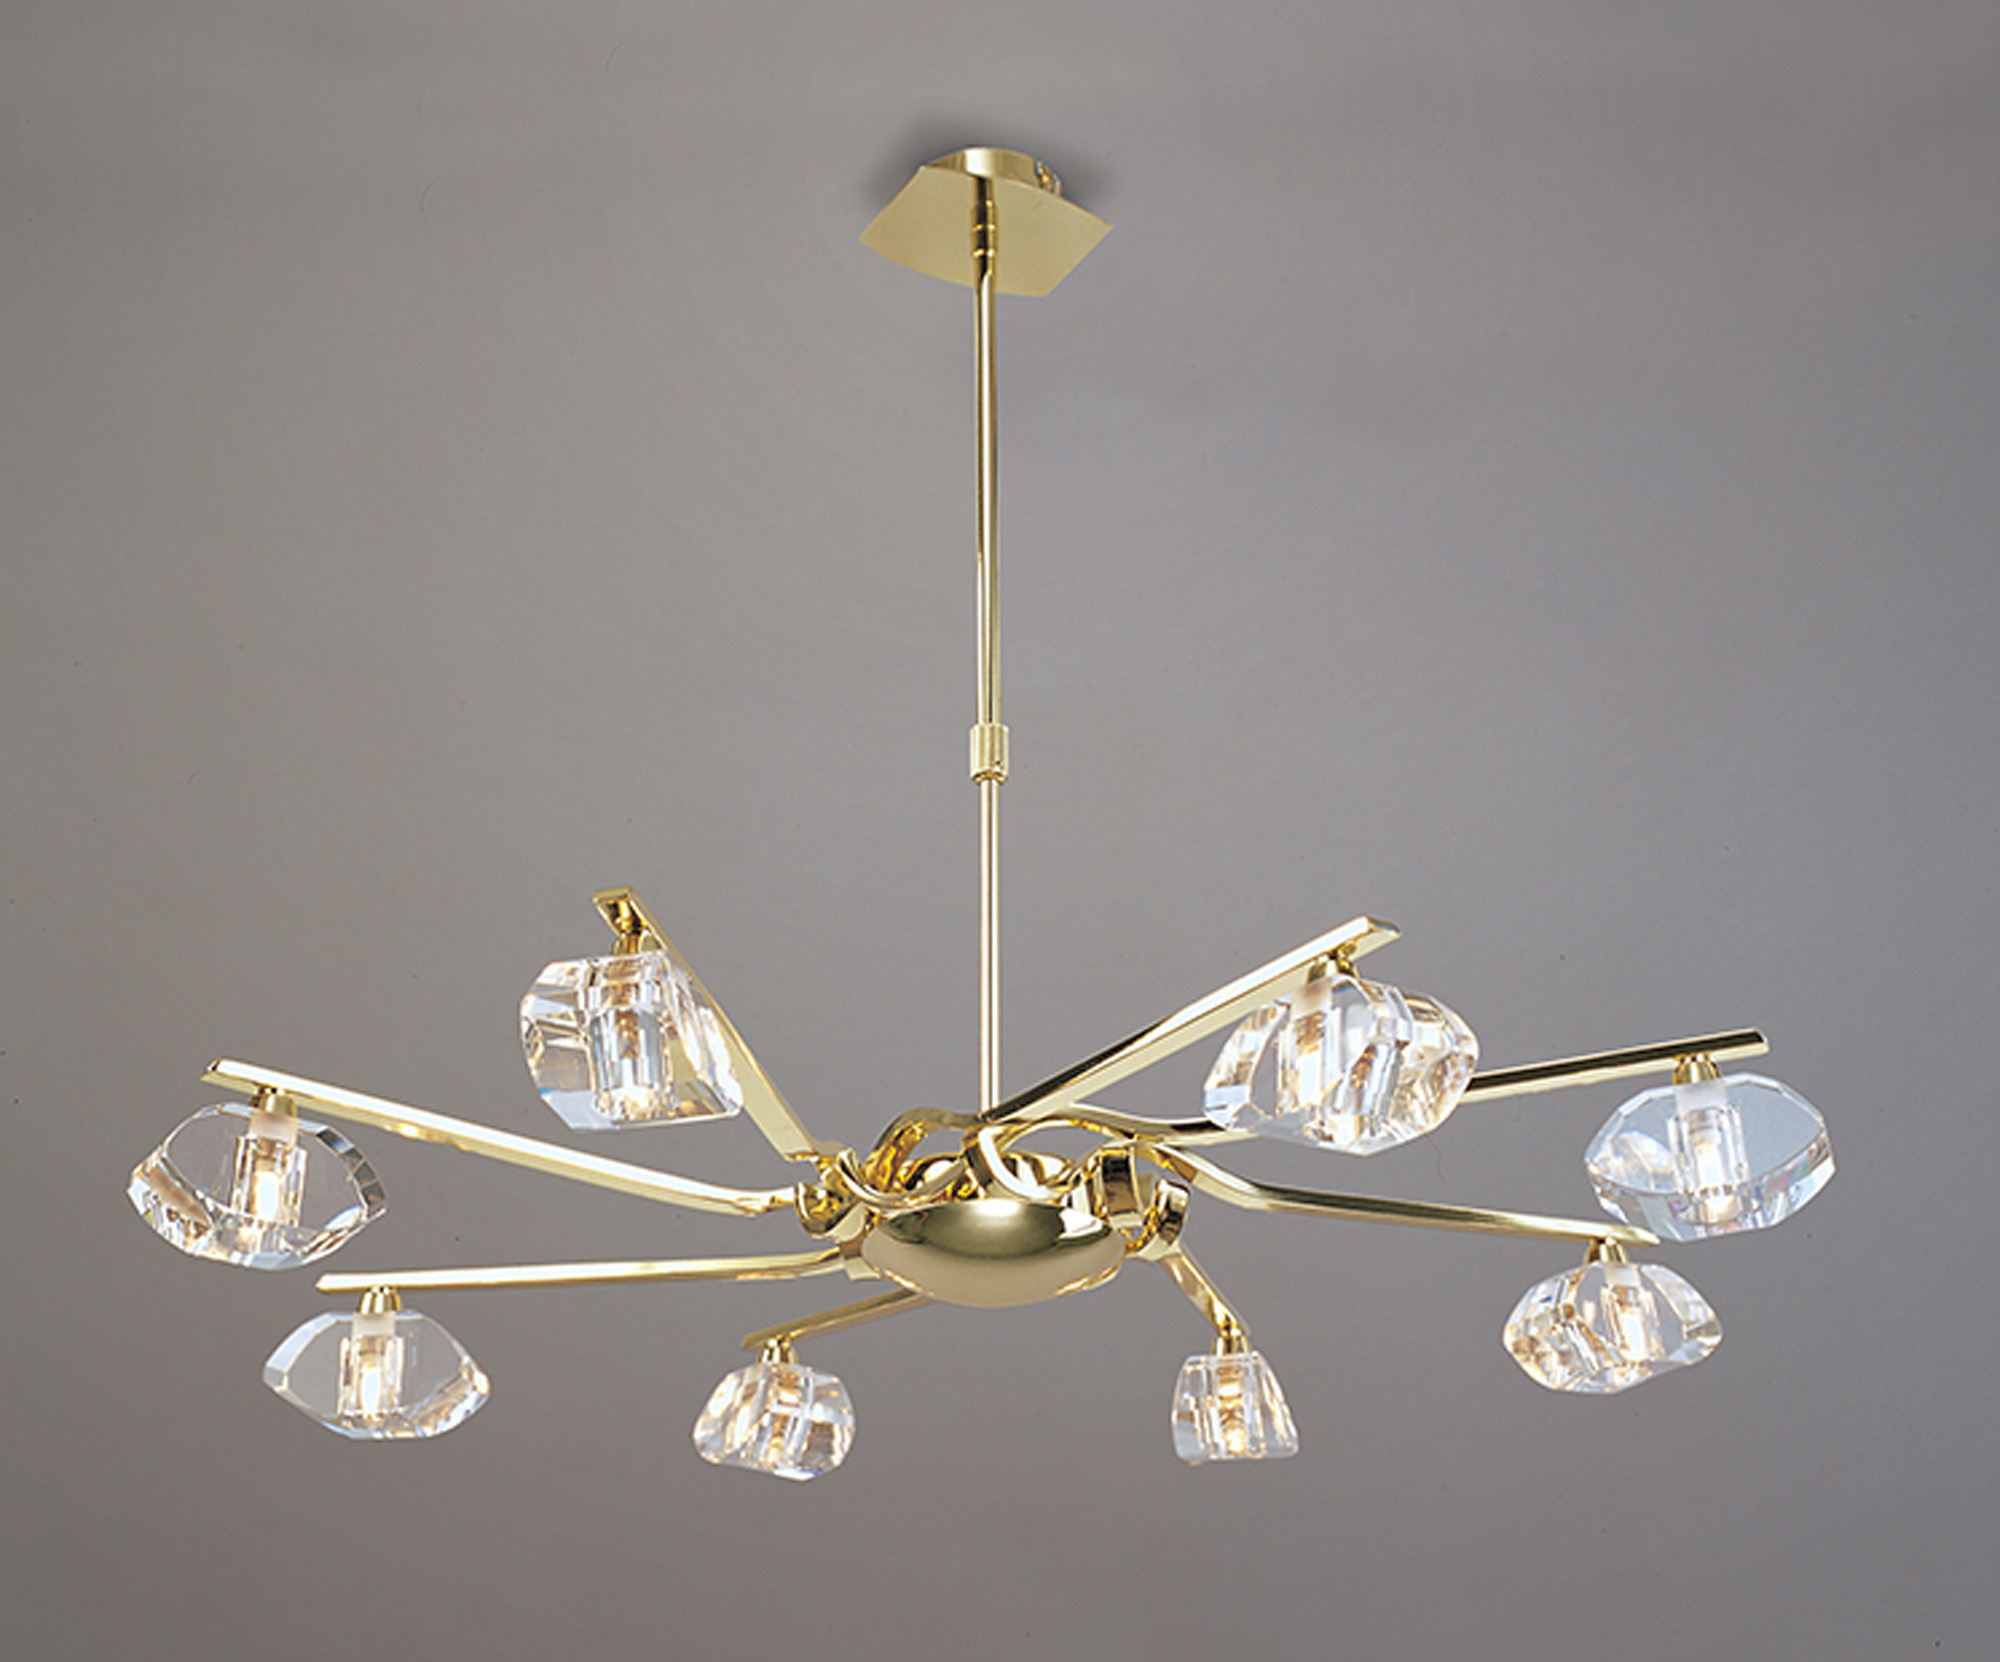 Alfa Polished Brass Ceiling Lights Mantra Multi Arm Fittings